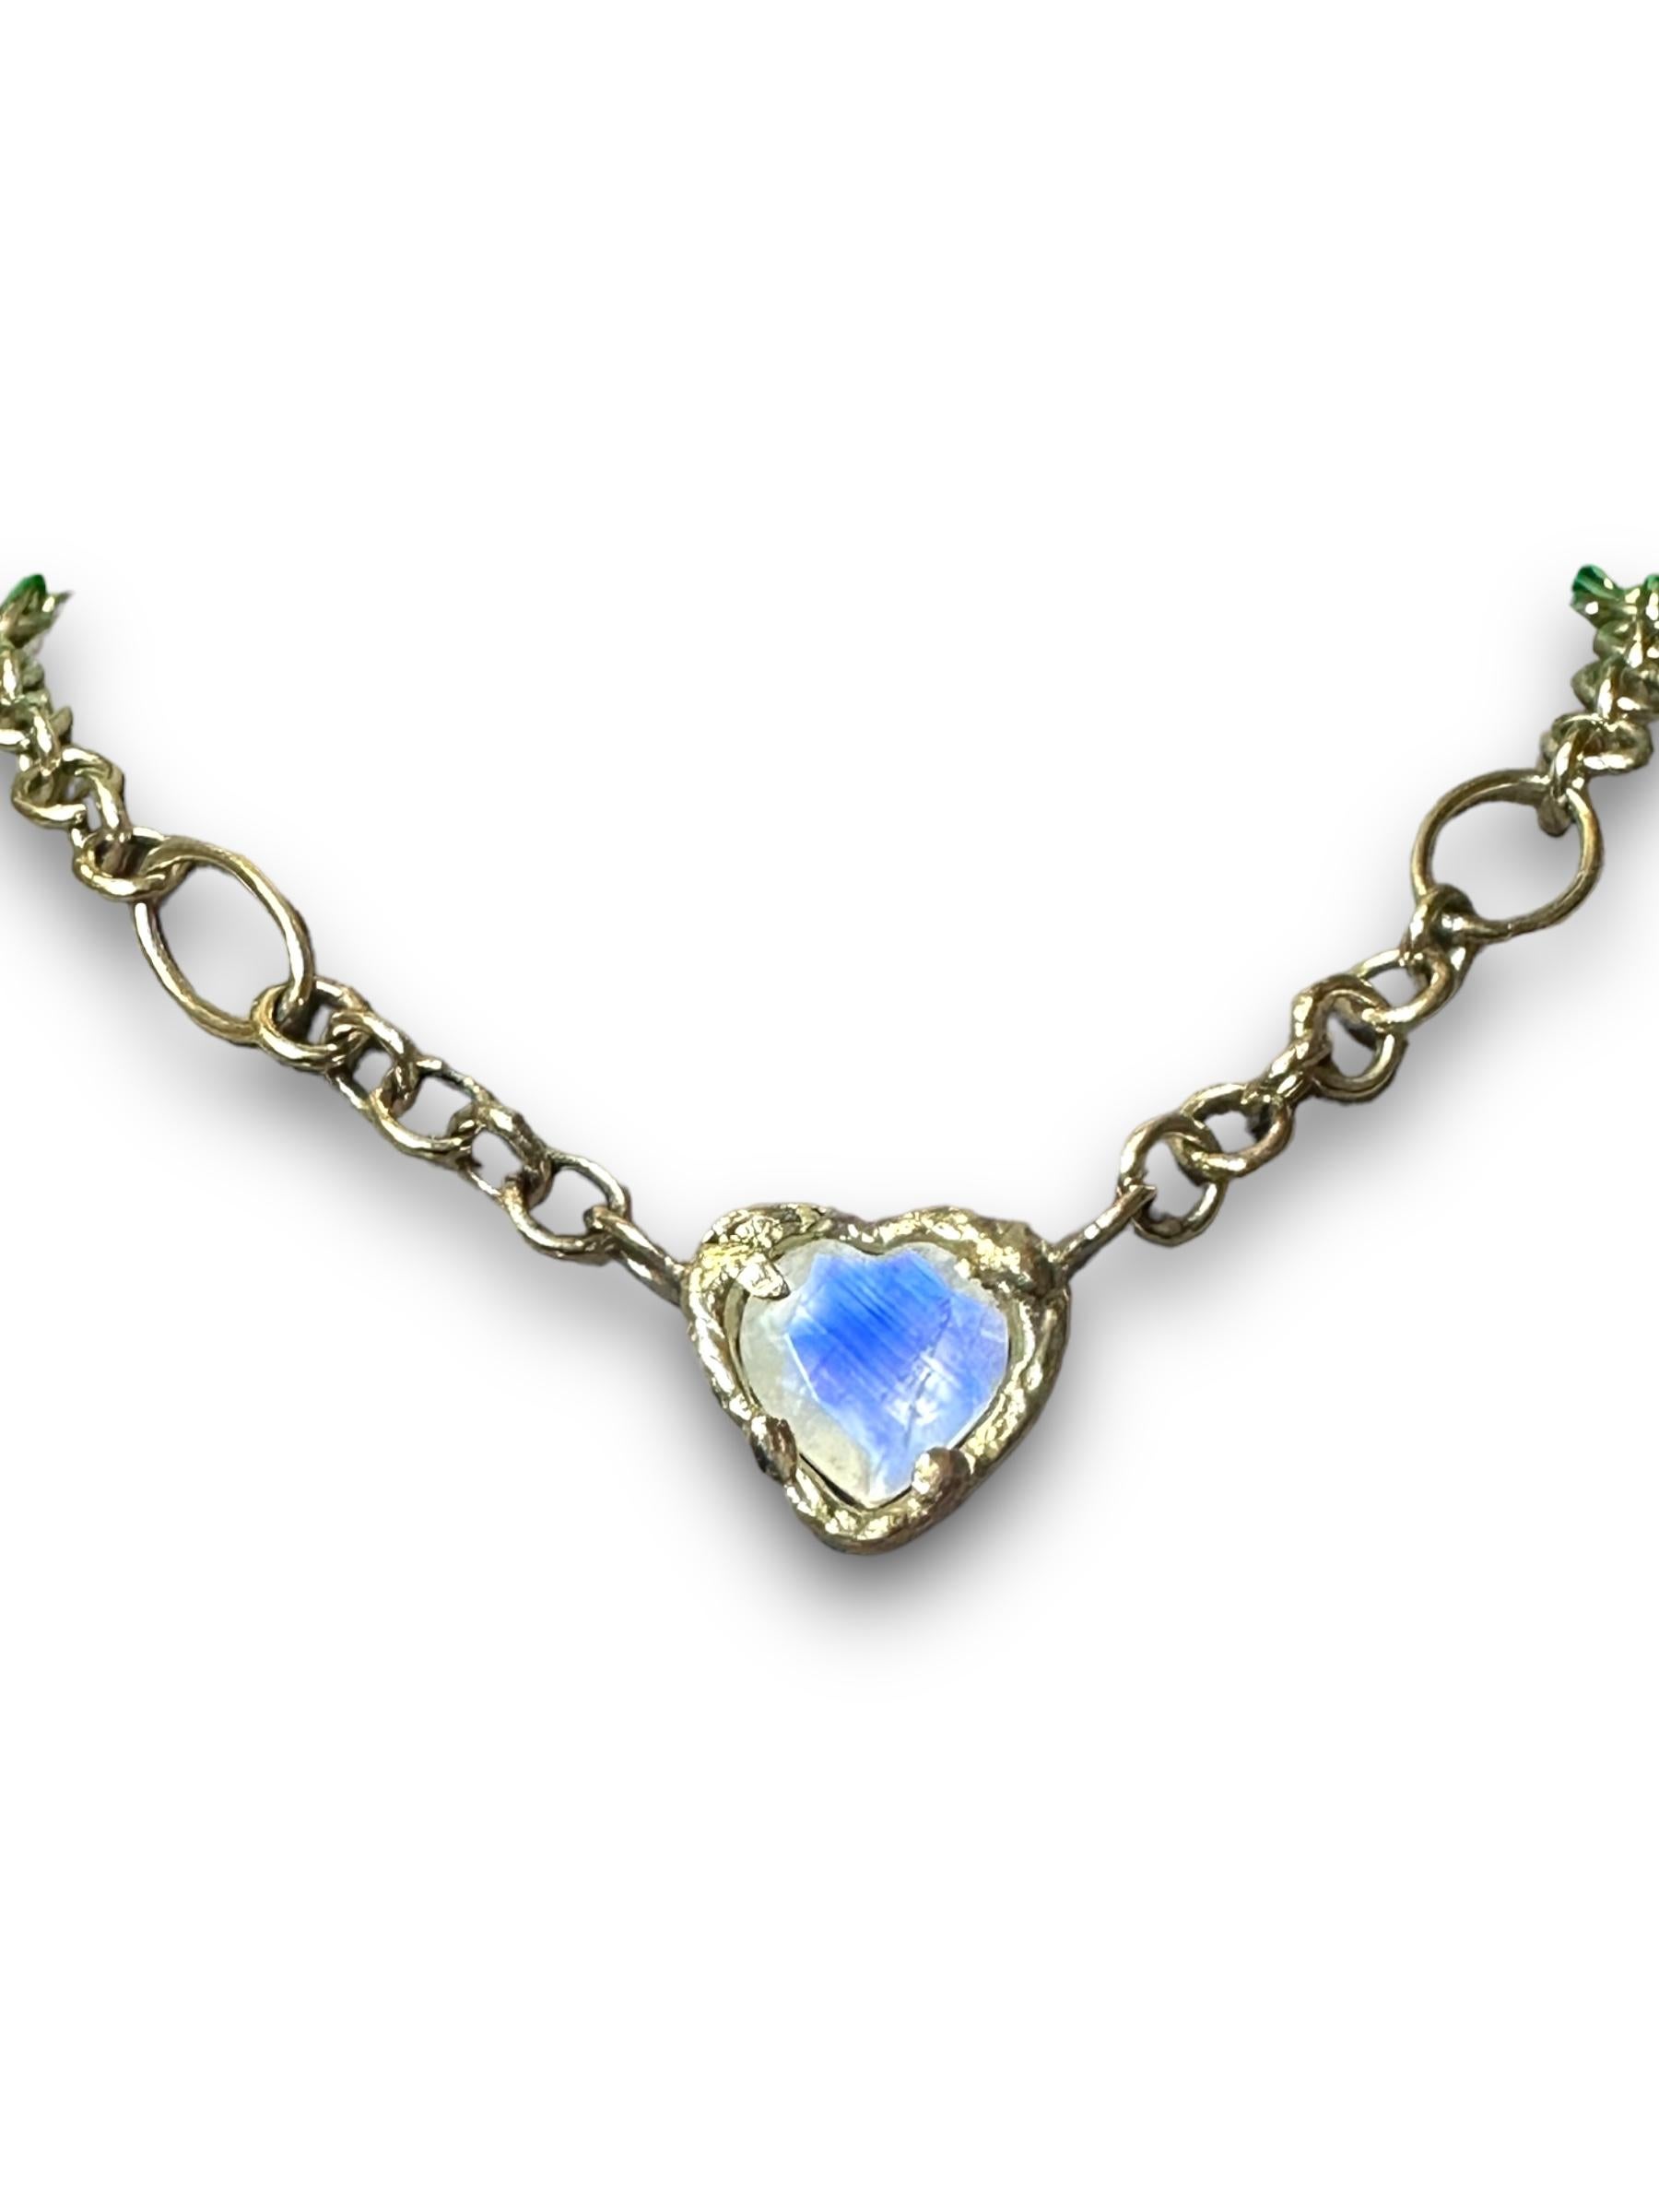 Introducing our stunning 14K yellow gold moonstone heart necklace that comes on a wonderful handmade chain - the perfect short necklace (choker style)  for any occasion! This piece exudes elegance and sophistication, making it the ideal addition to